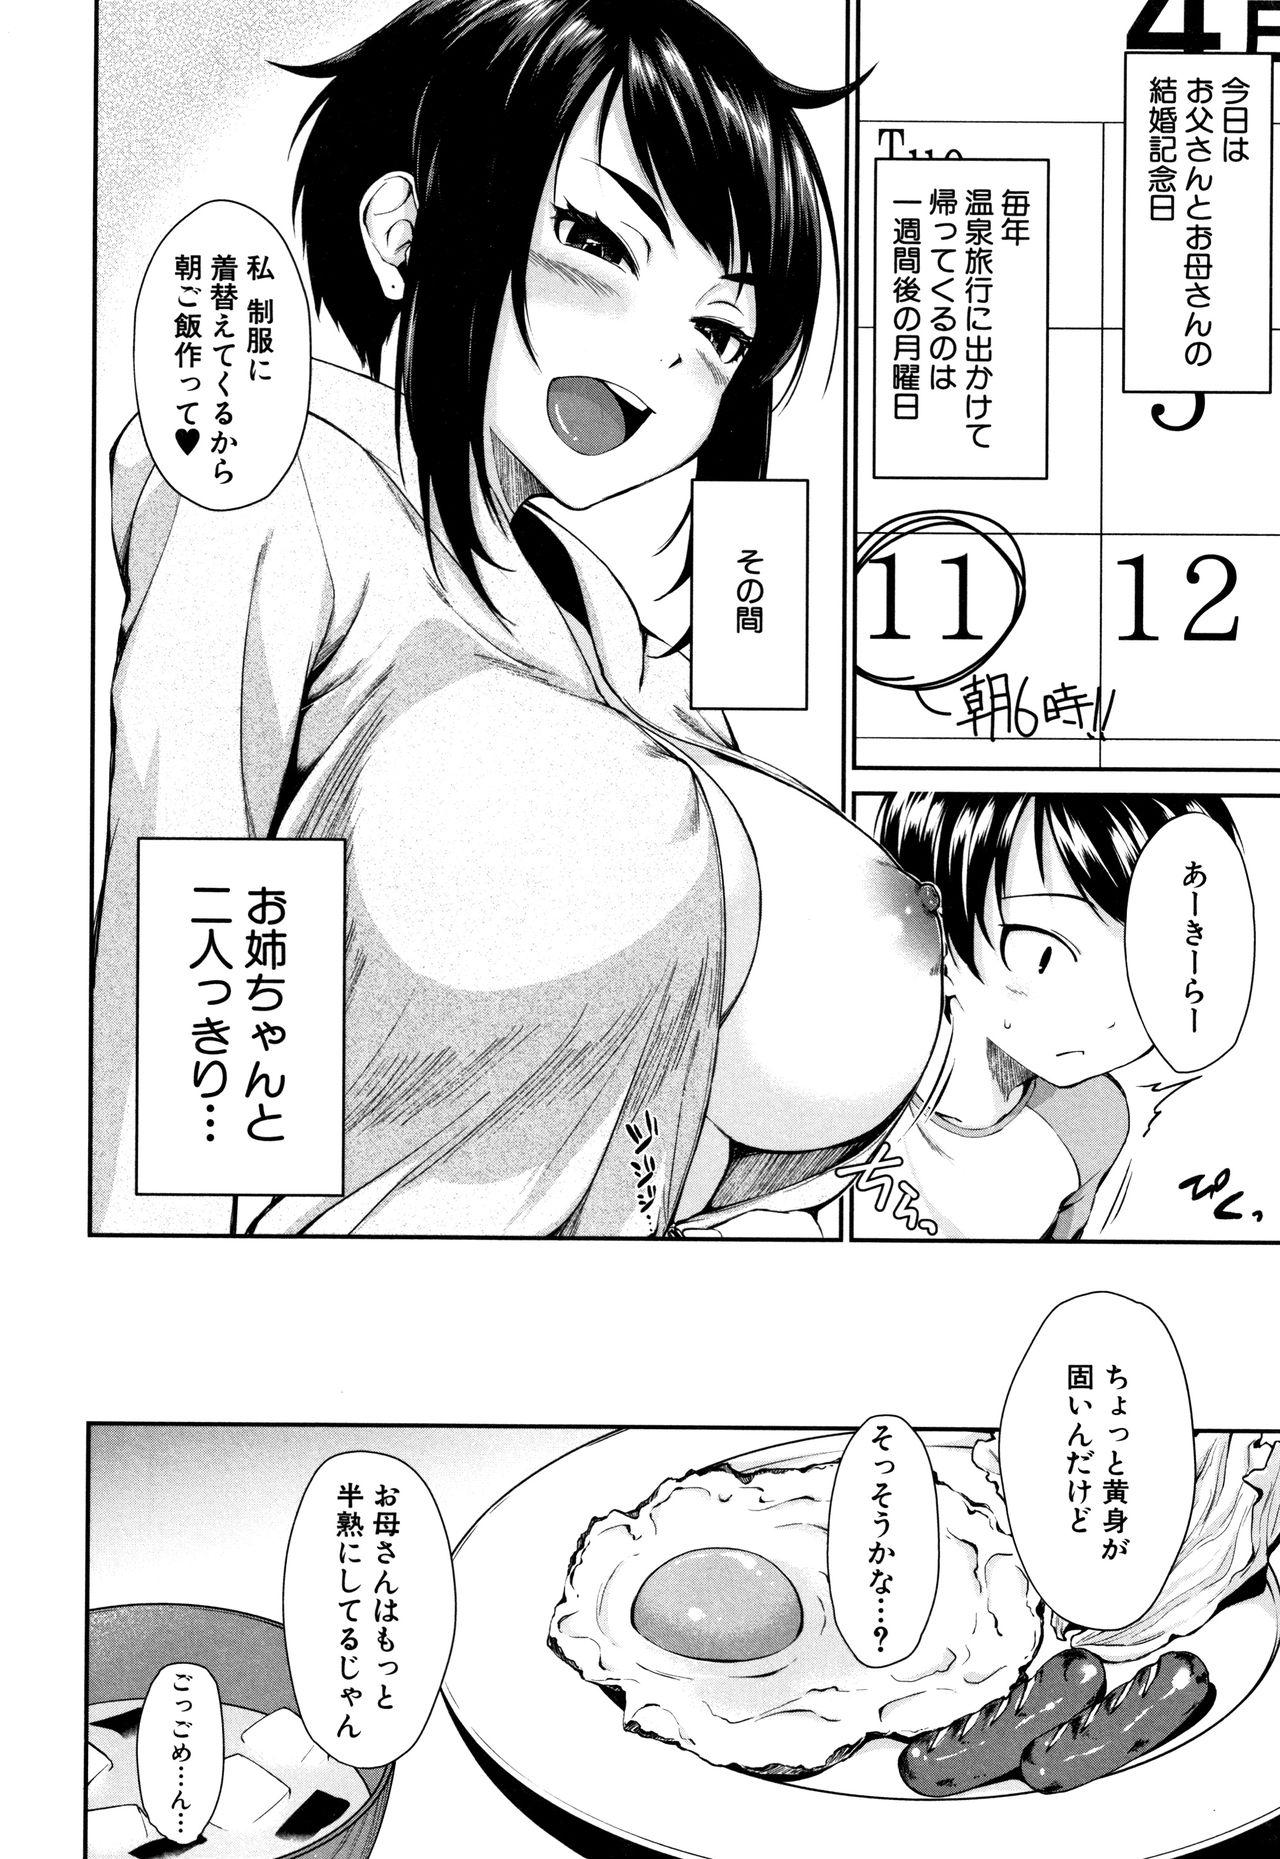 Onee-chan to Issho! 44